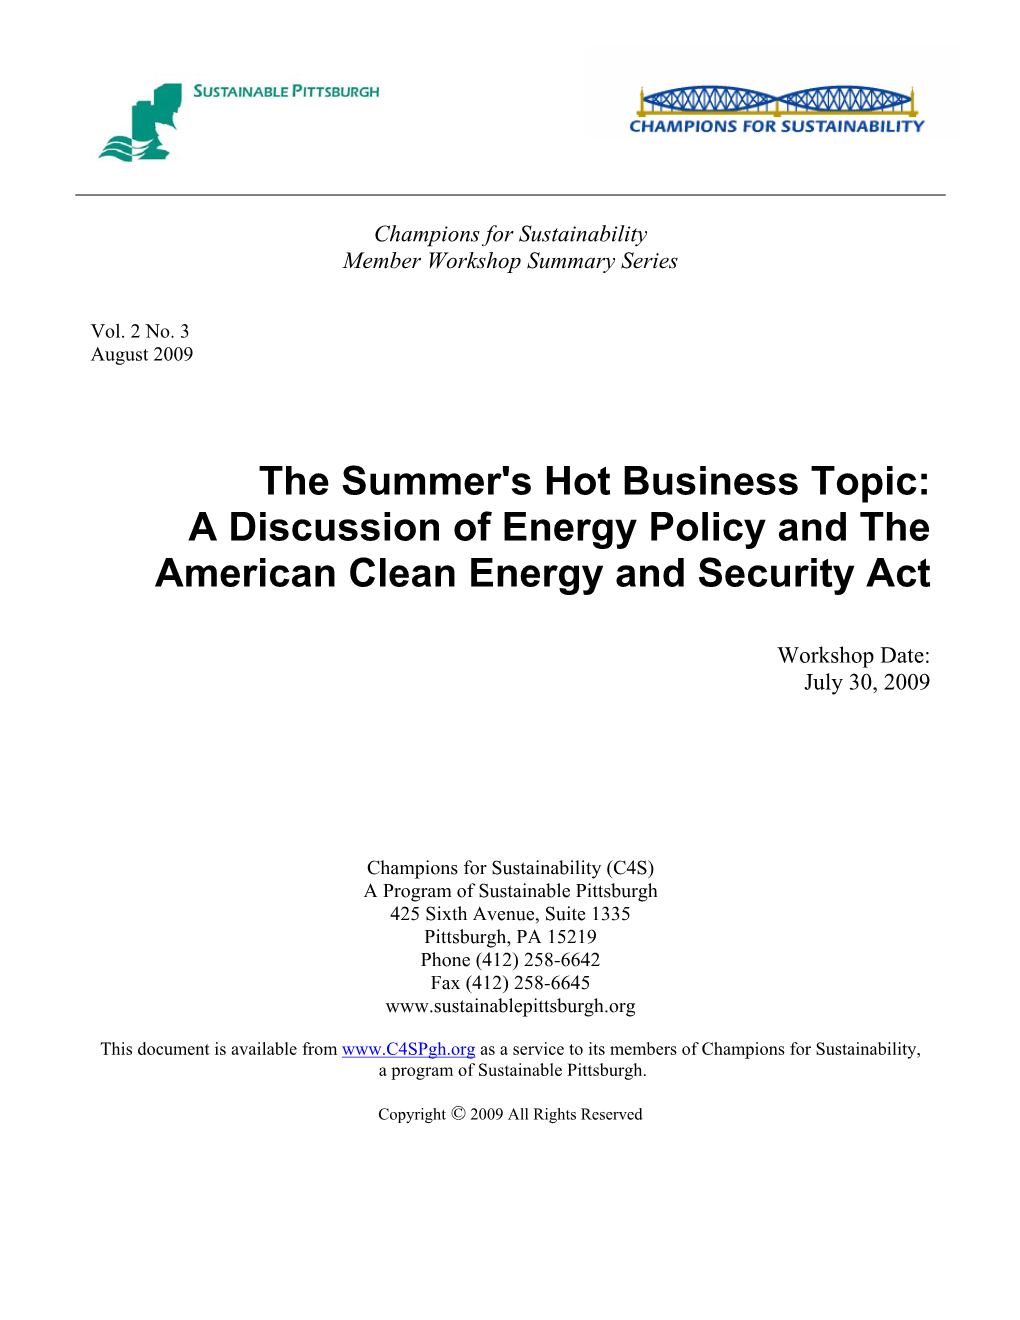 A Discussion of Energy Policy and the American Clean Energy and Security Act